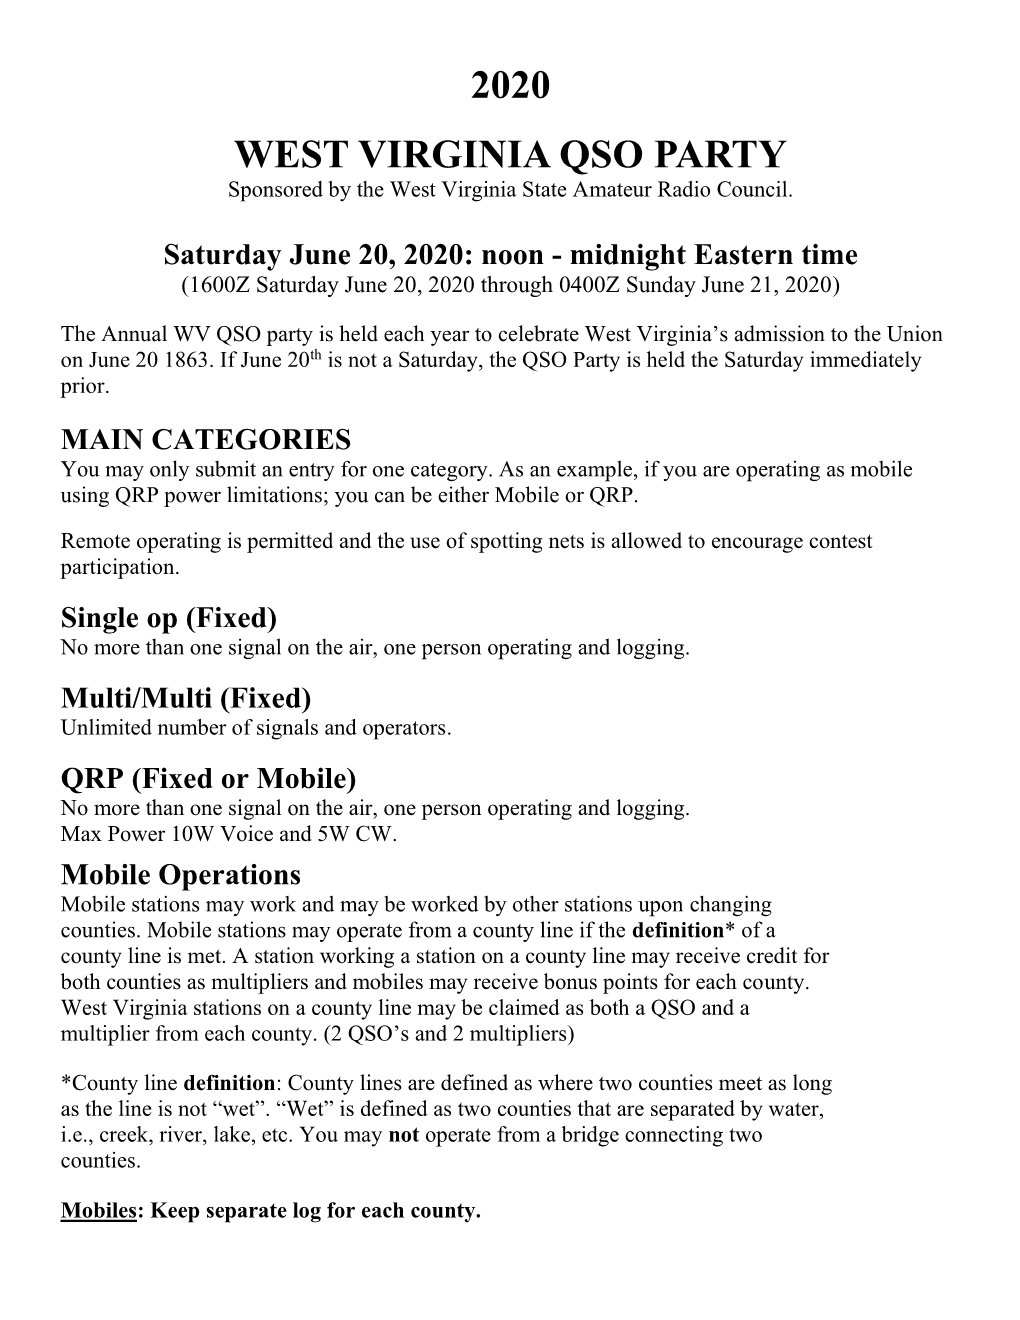 2020 WEST VIRGINIA QSO PARTY Sponsored by the West Virginia State Amateur Radio Council